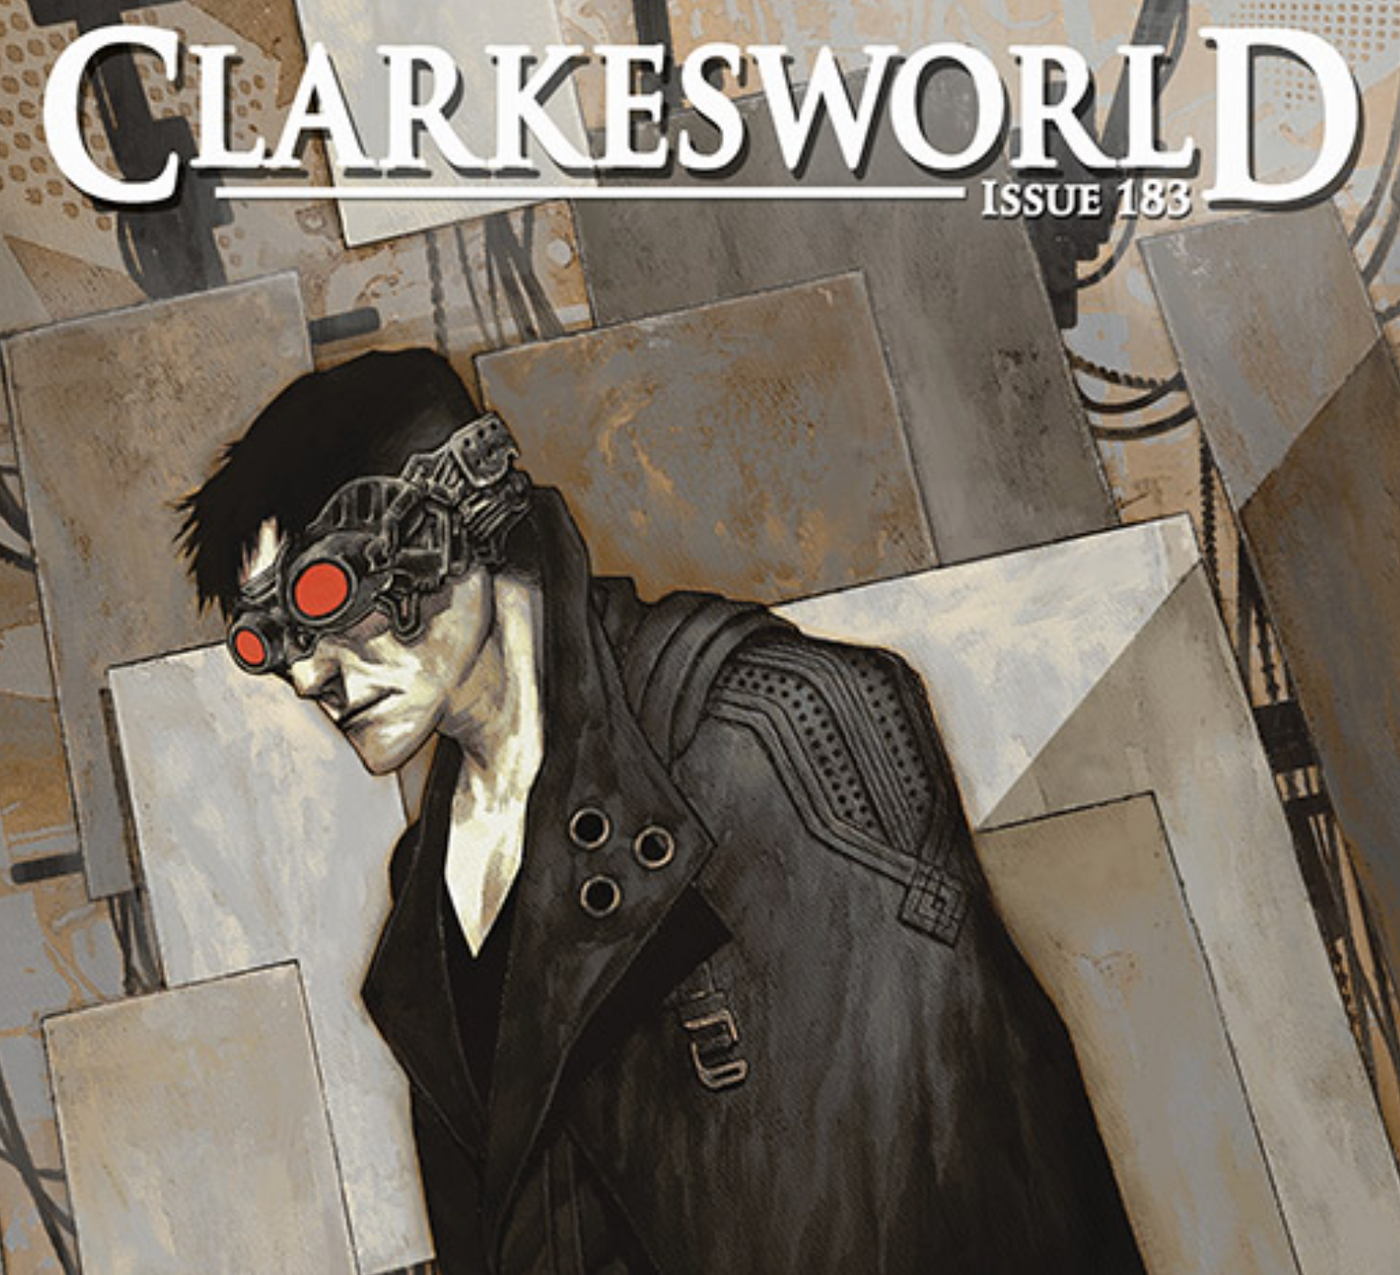 A cover of Clarkesworld depicting a mysterious man with a robotic mask covering his eyes.